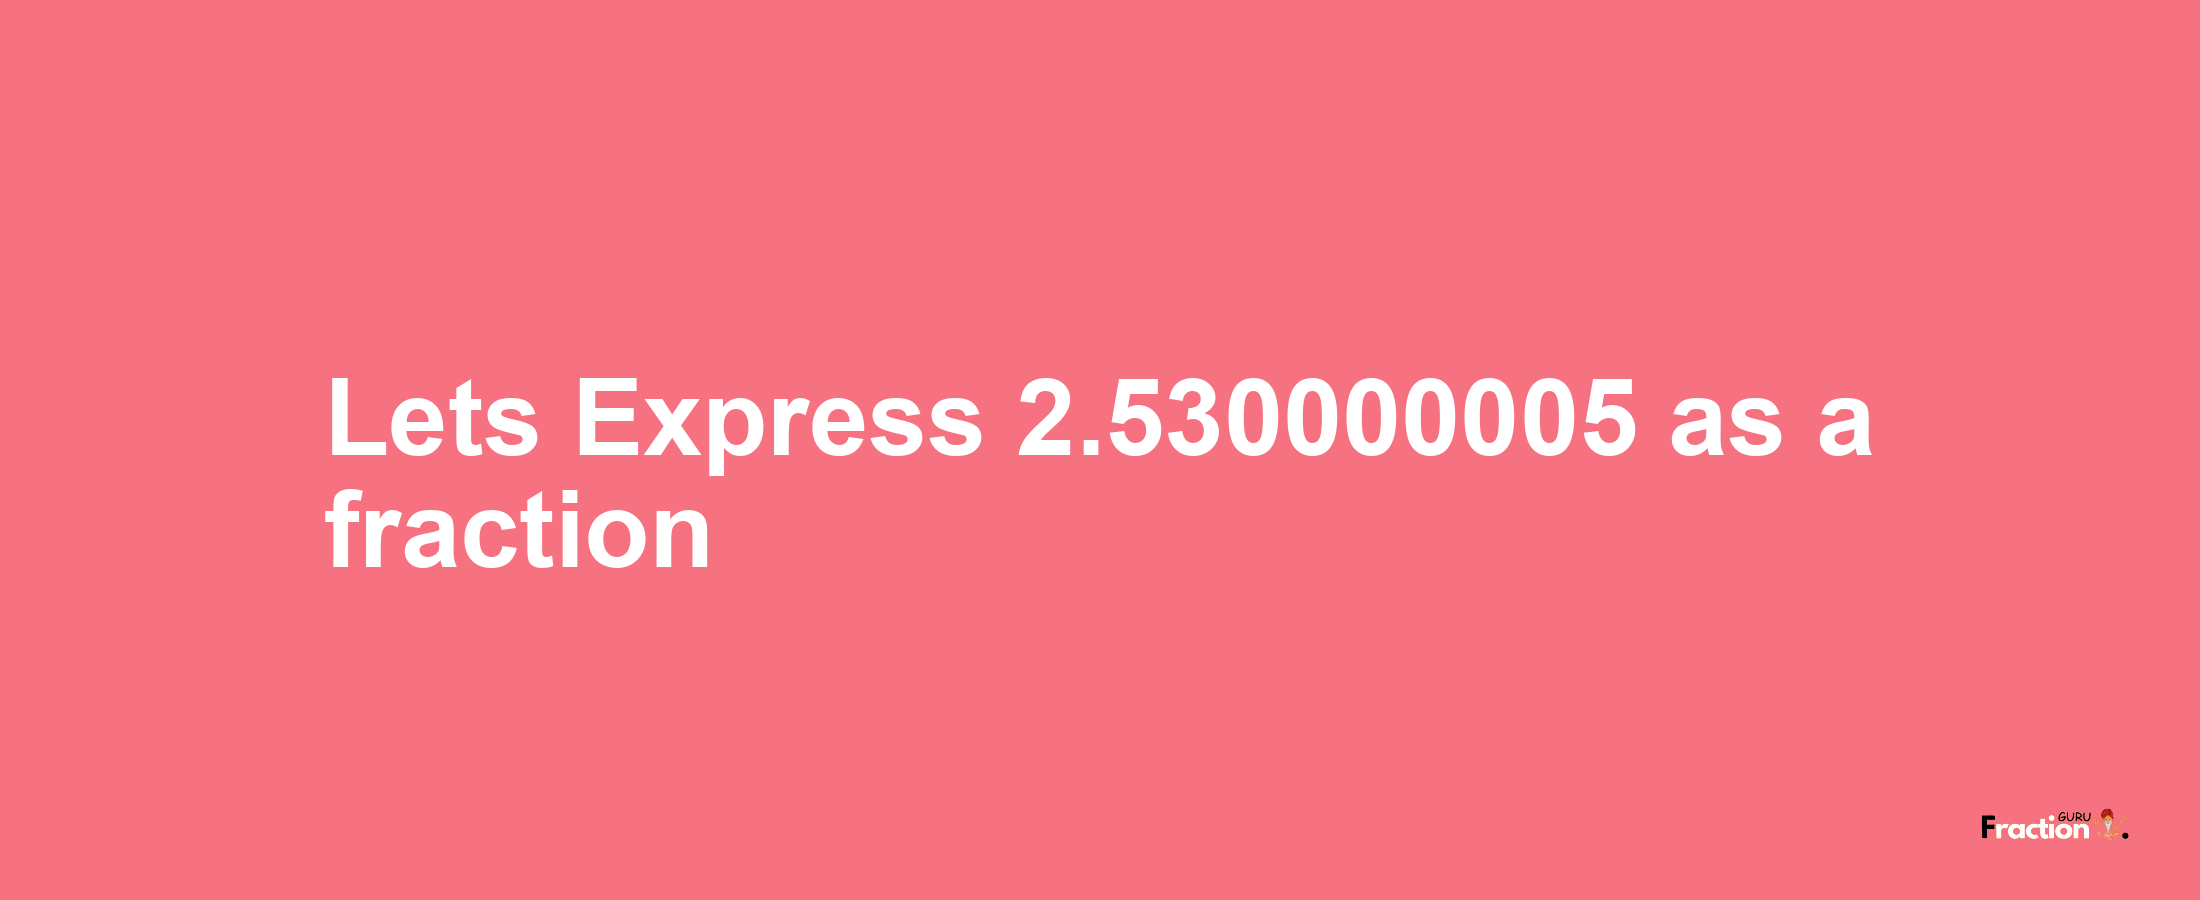 Lets Express 2.530000005 as afraction